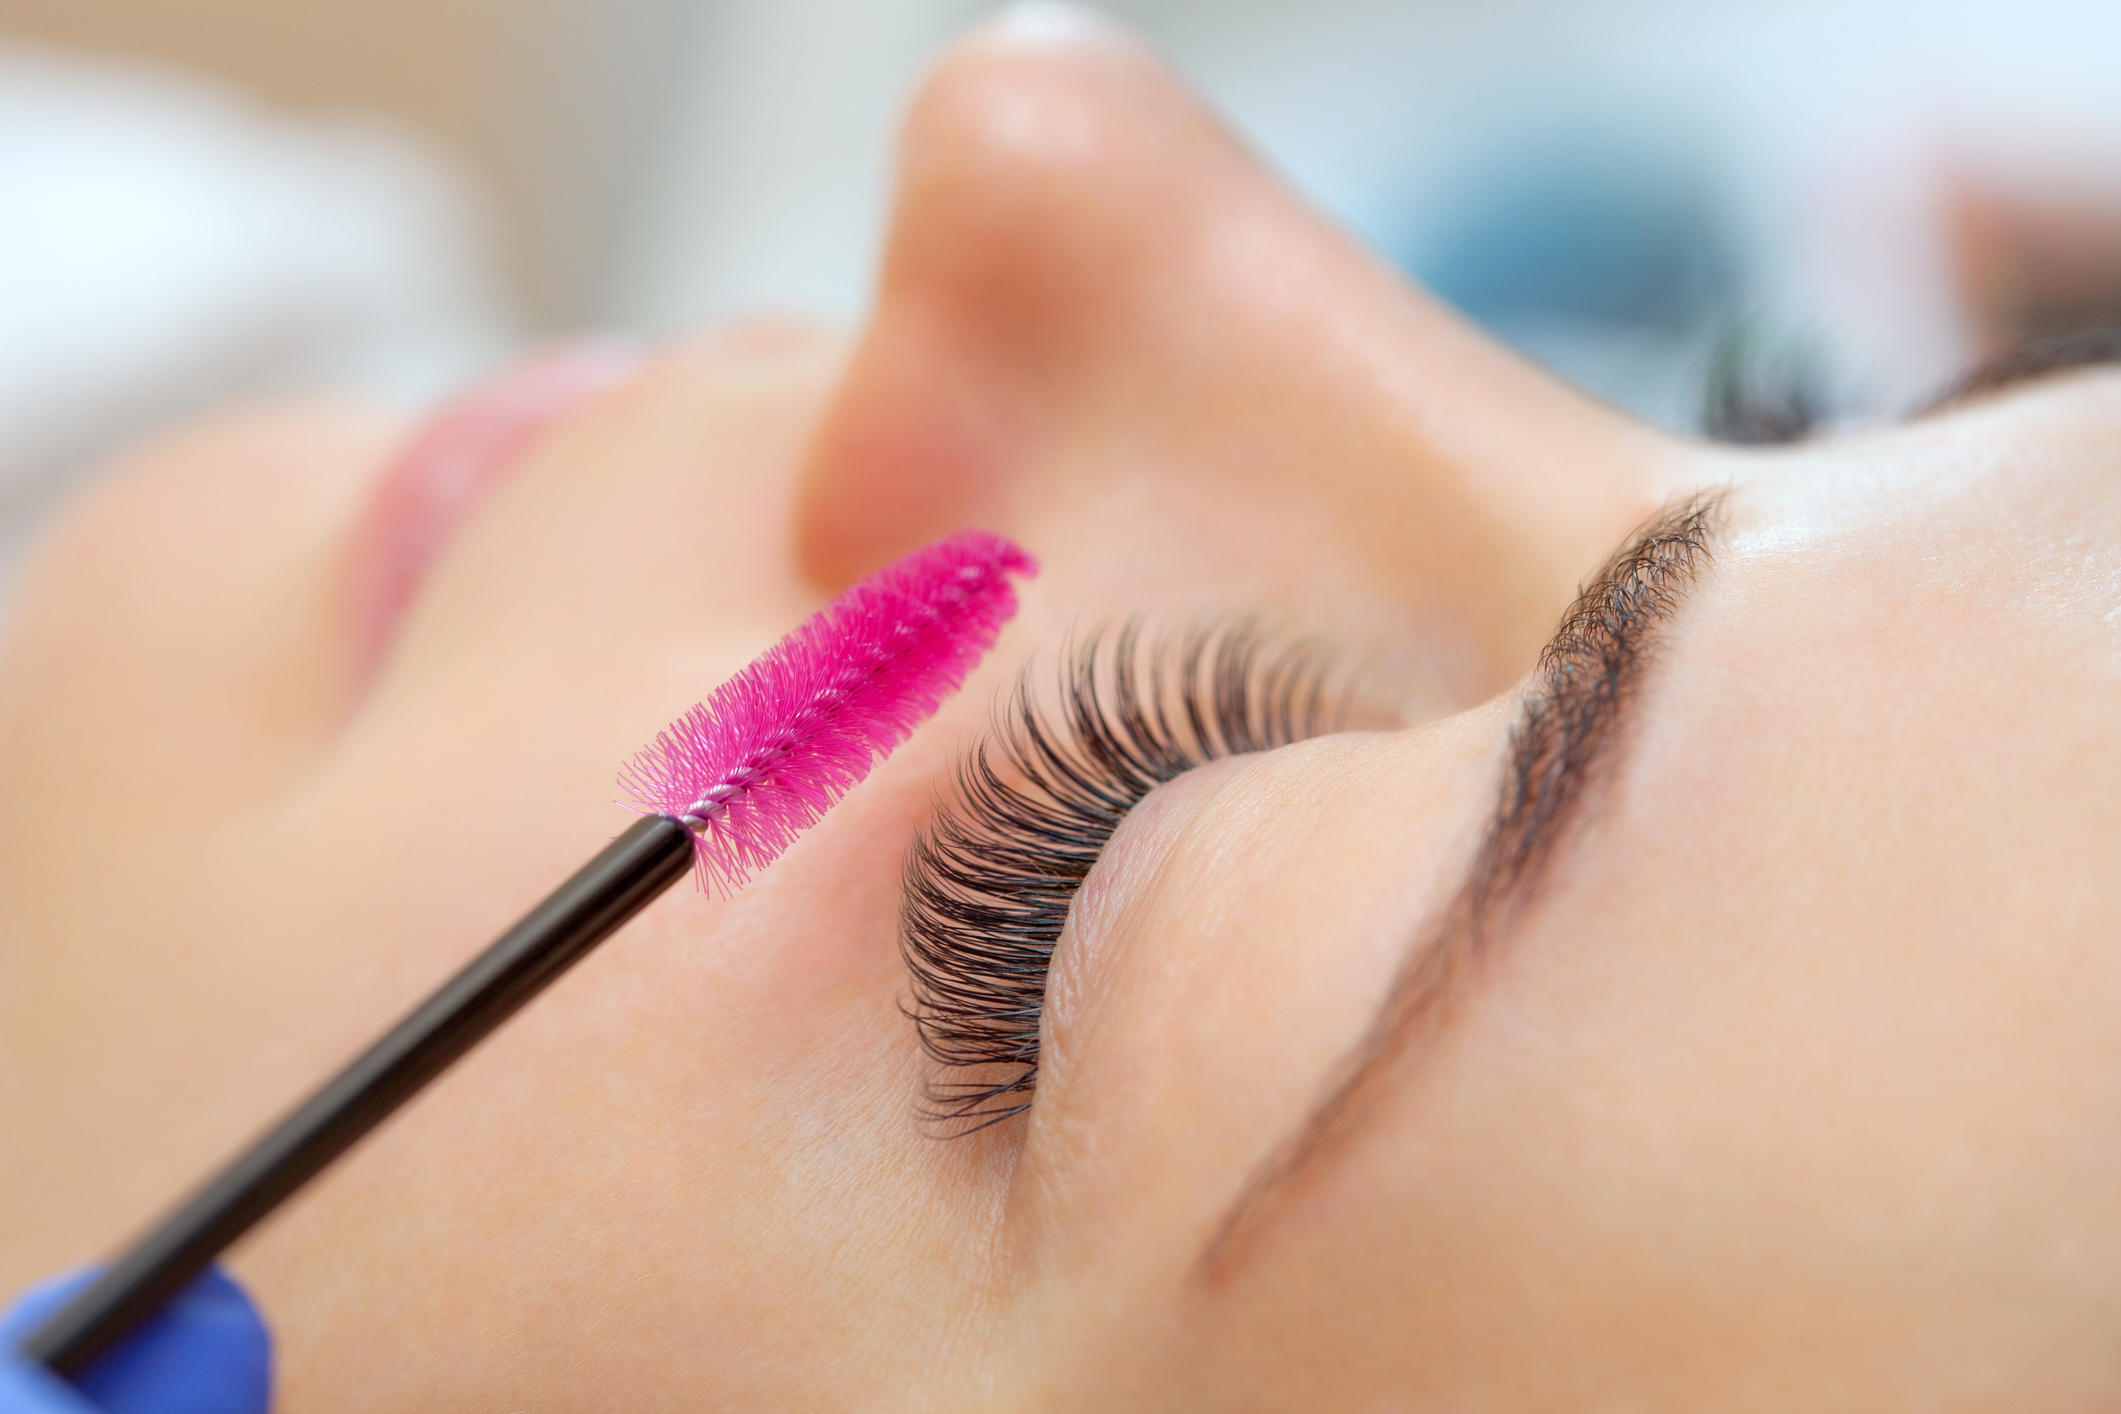 Belleza Latina Lashes and Salon has years of eyelash extension experience. Eyelash extensions are our specialty. Our stylists and beauty technicians will make sure that your lashes look amazing.